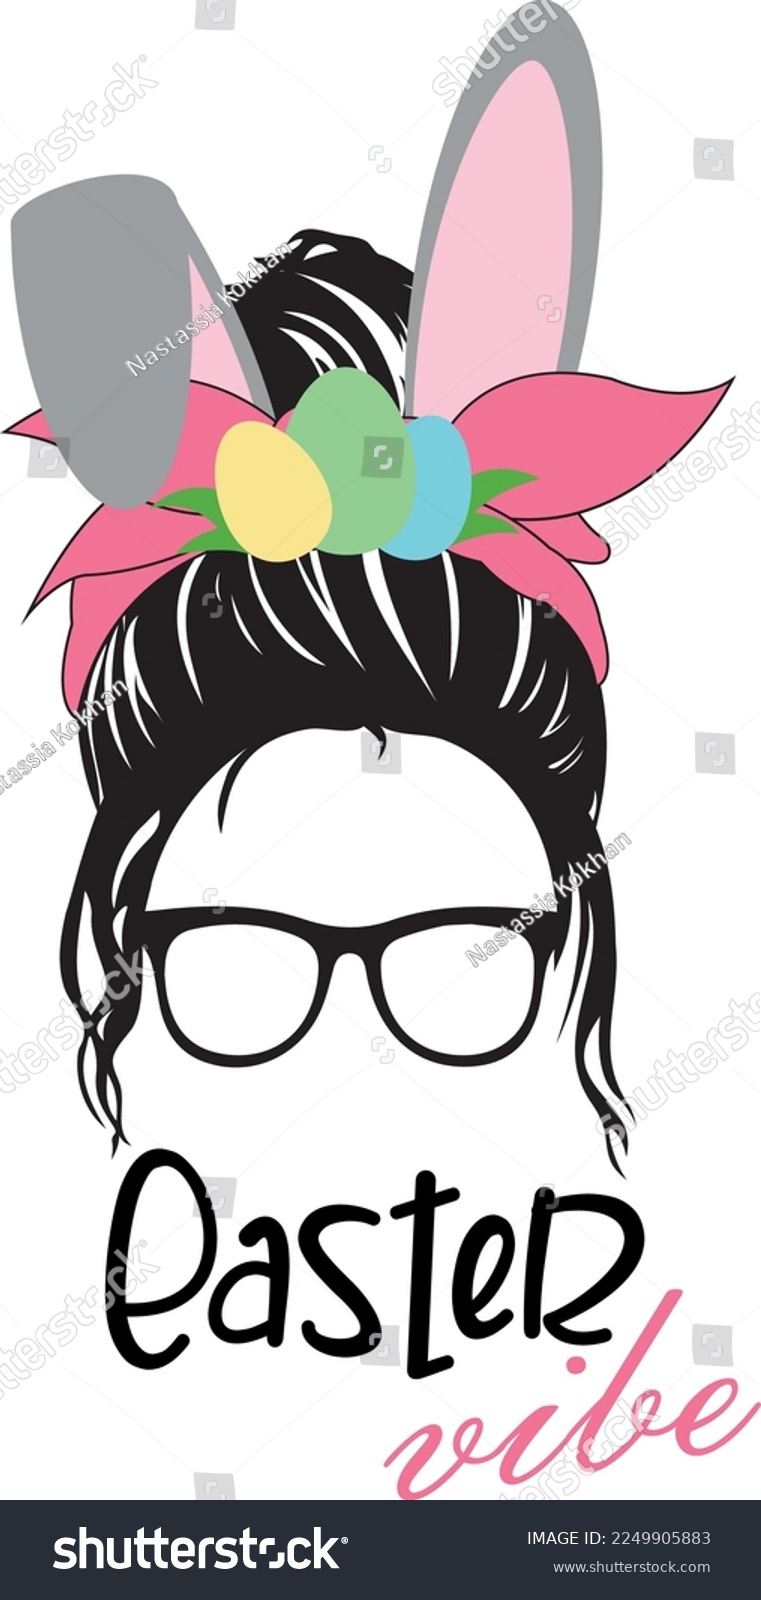 SVG of Easter messy bun Svg vector Illustration isolated on white background. Easter vibe shirt design with eggs, sunglasses, bow and bunny ears. Easter print decoration svg